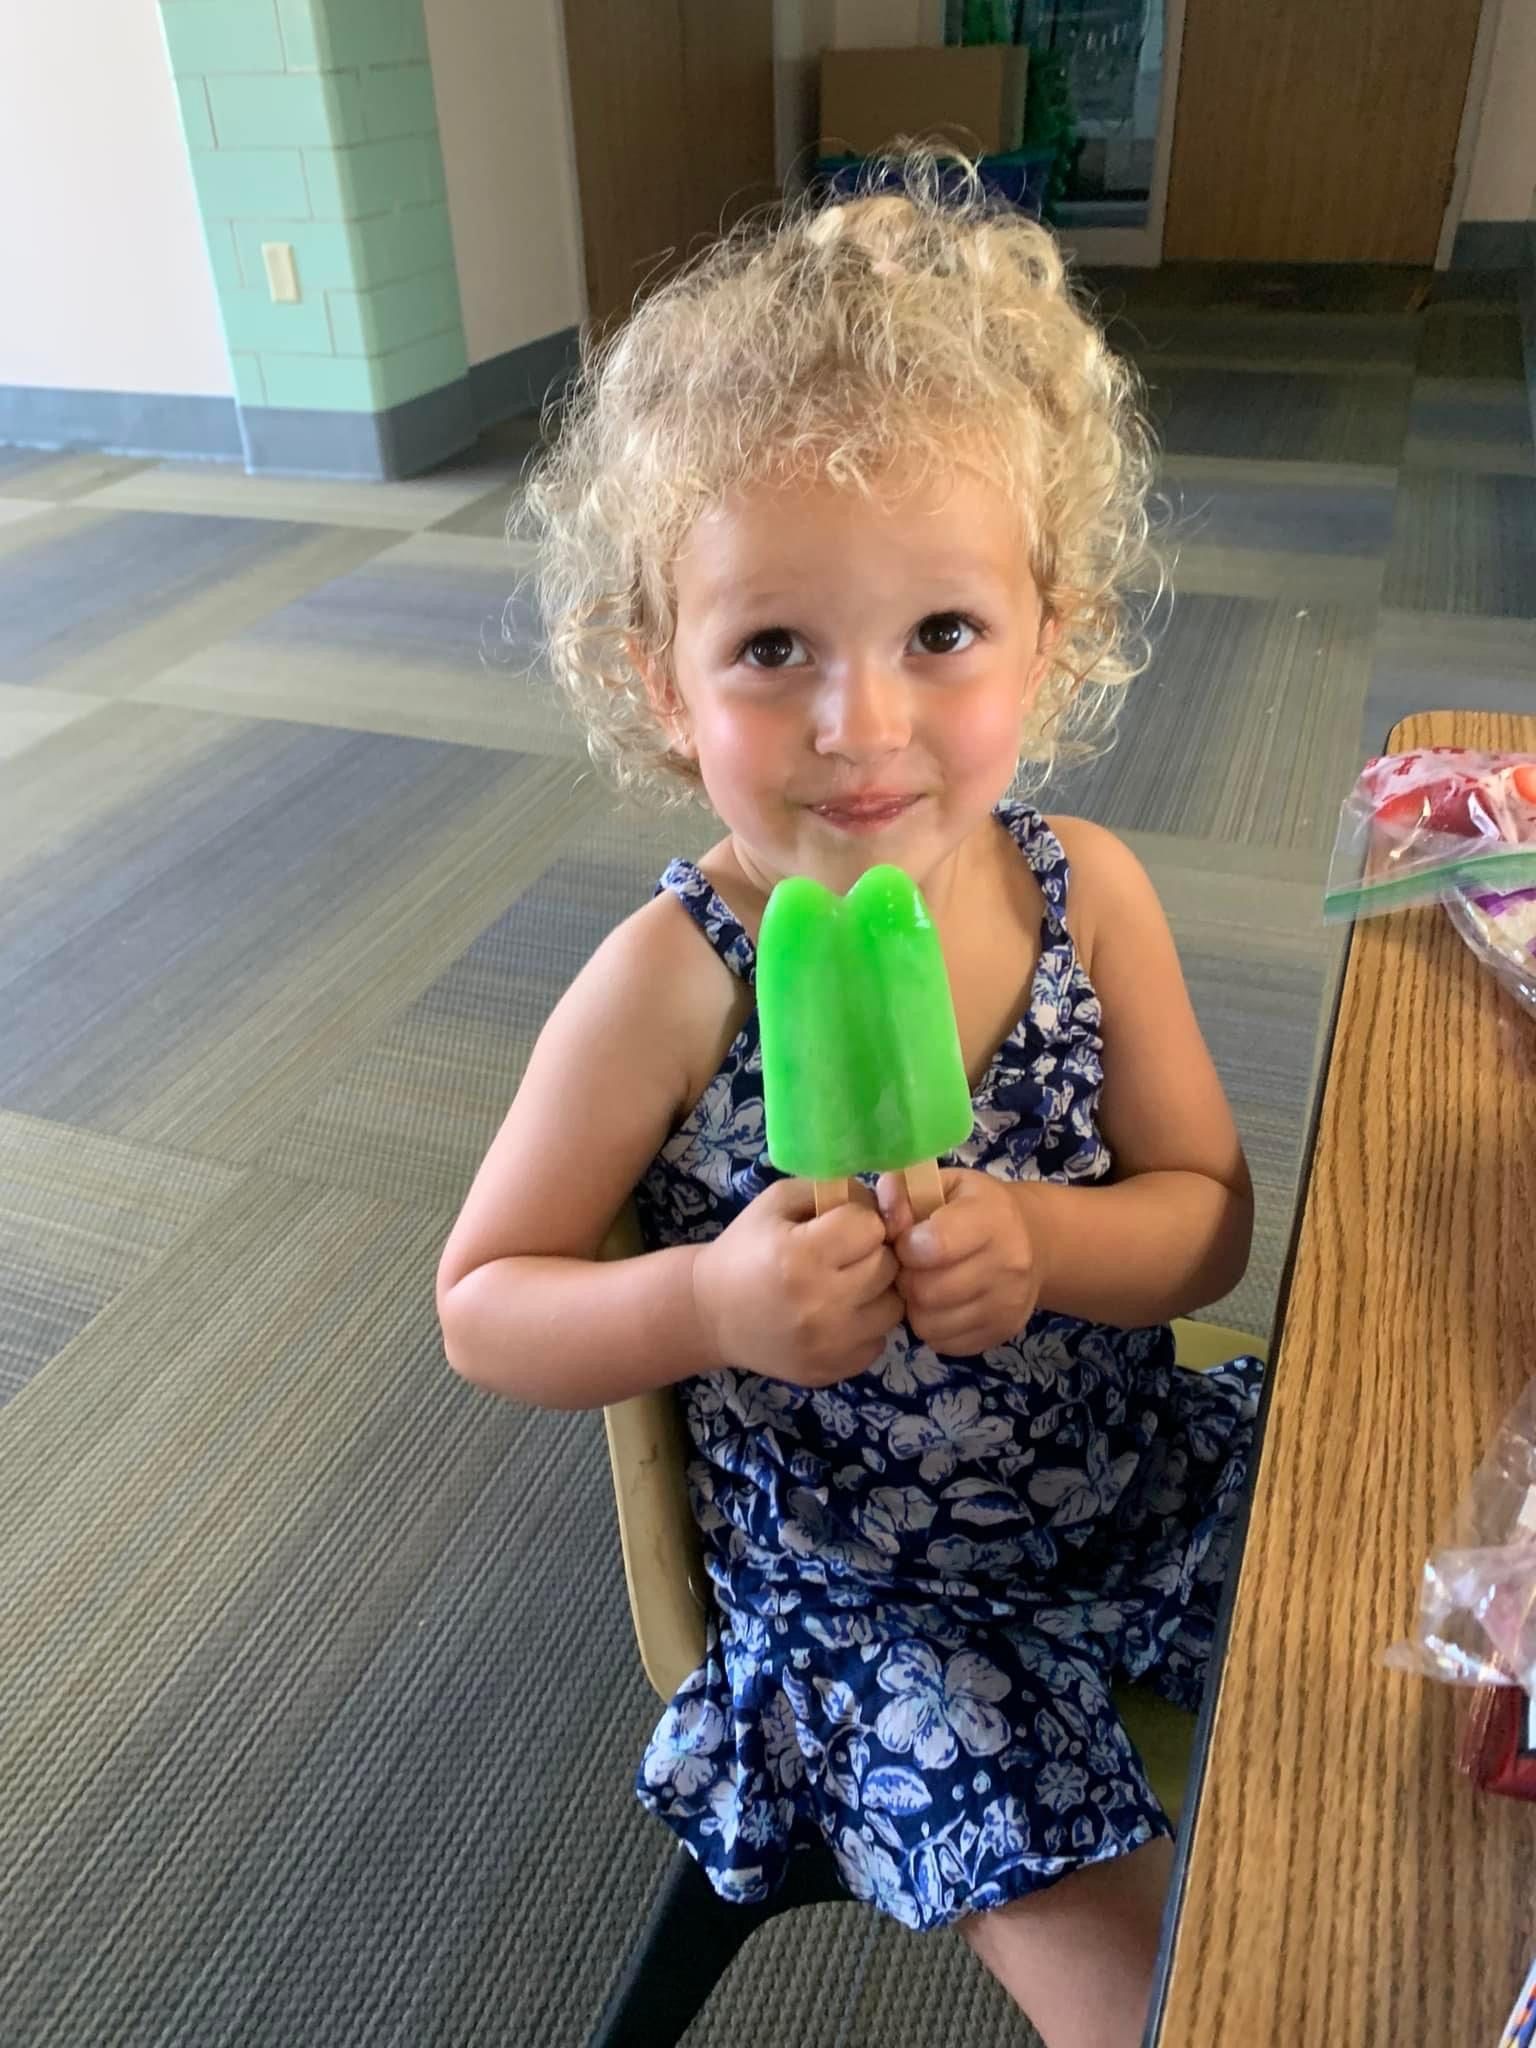 A little girl is sitting at a table holding a green popsicle